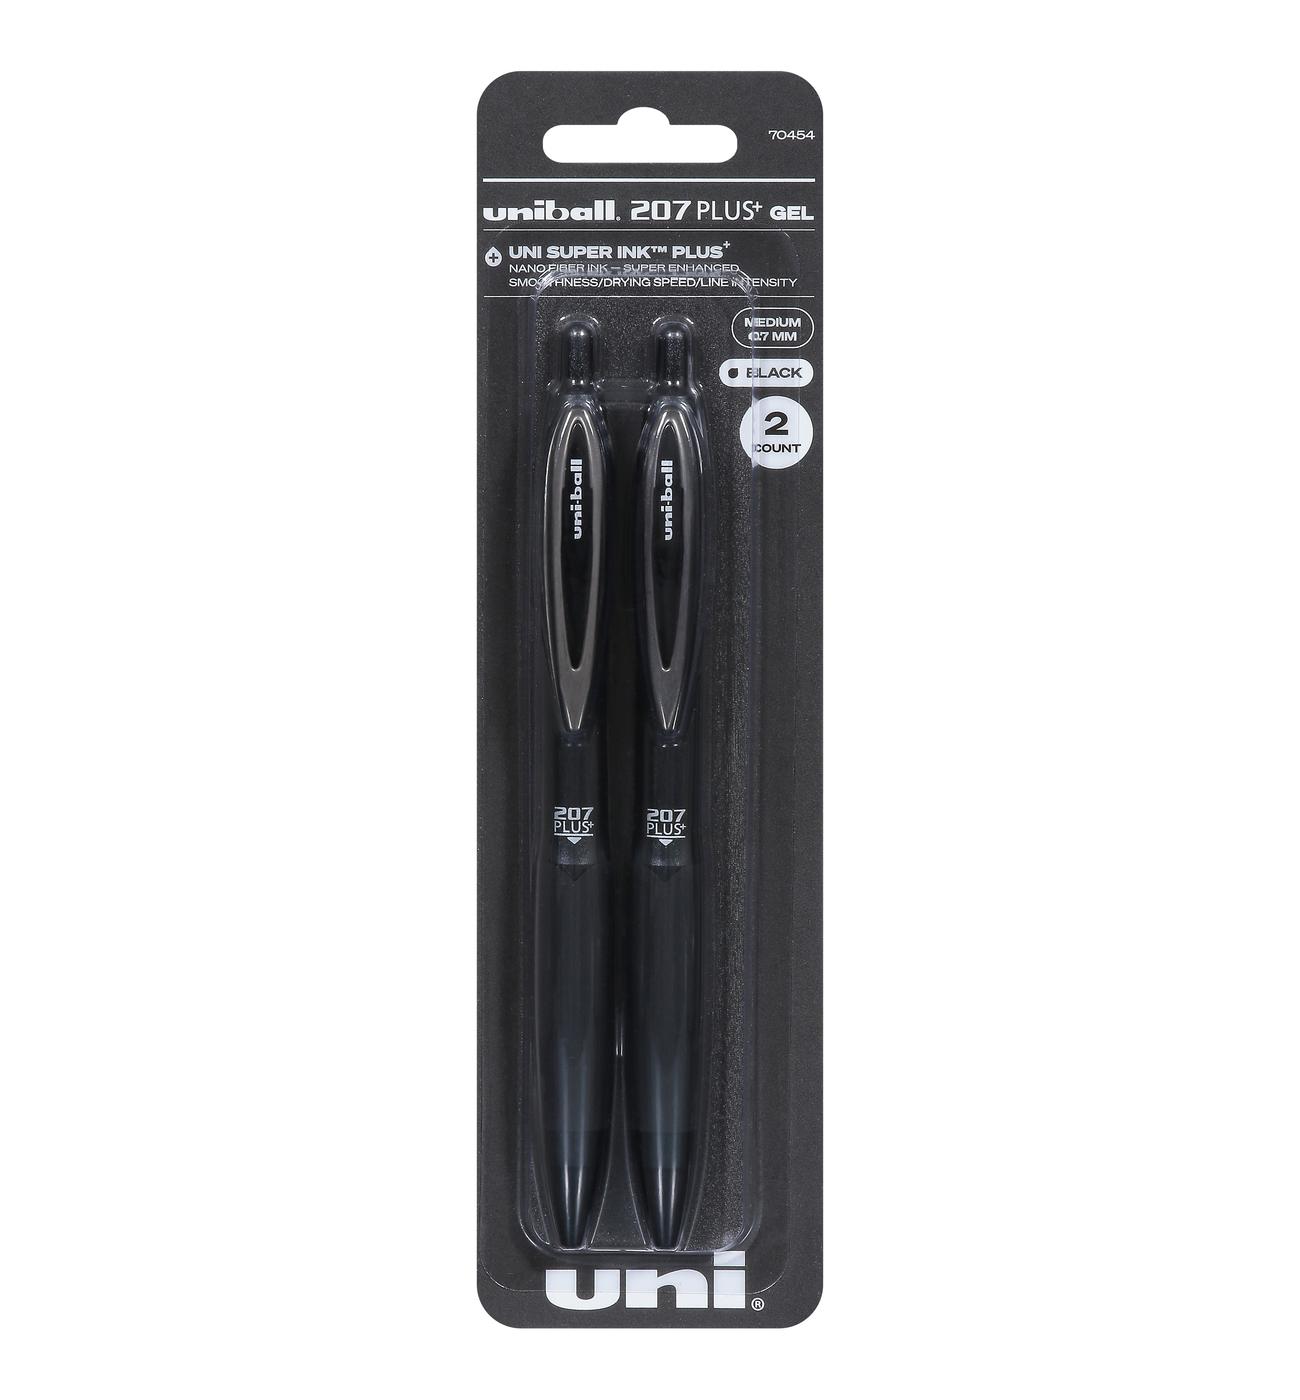 Uniball One Gel Pen 5 Pack, 0.7mm Medium Assorted Pens, Gel Ink Pens |  Office Supplies Sold by Uniball are Pens, Ballpoint Pen, Colored Pens, Gel